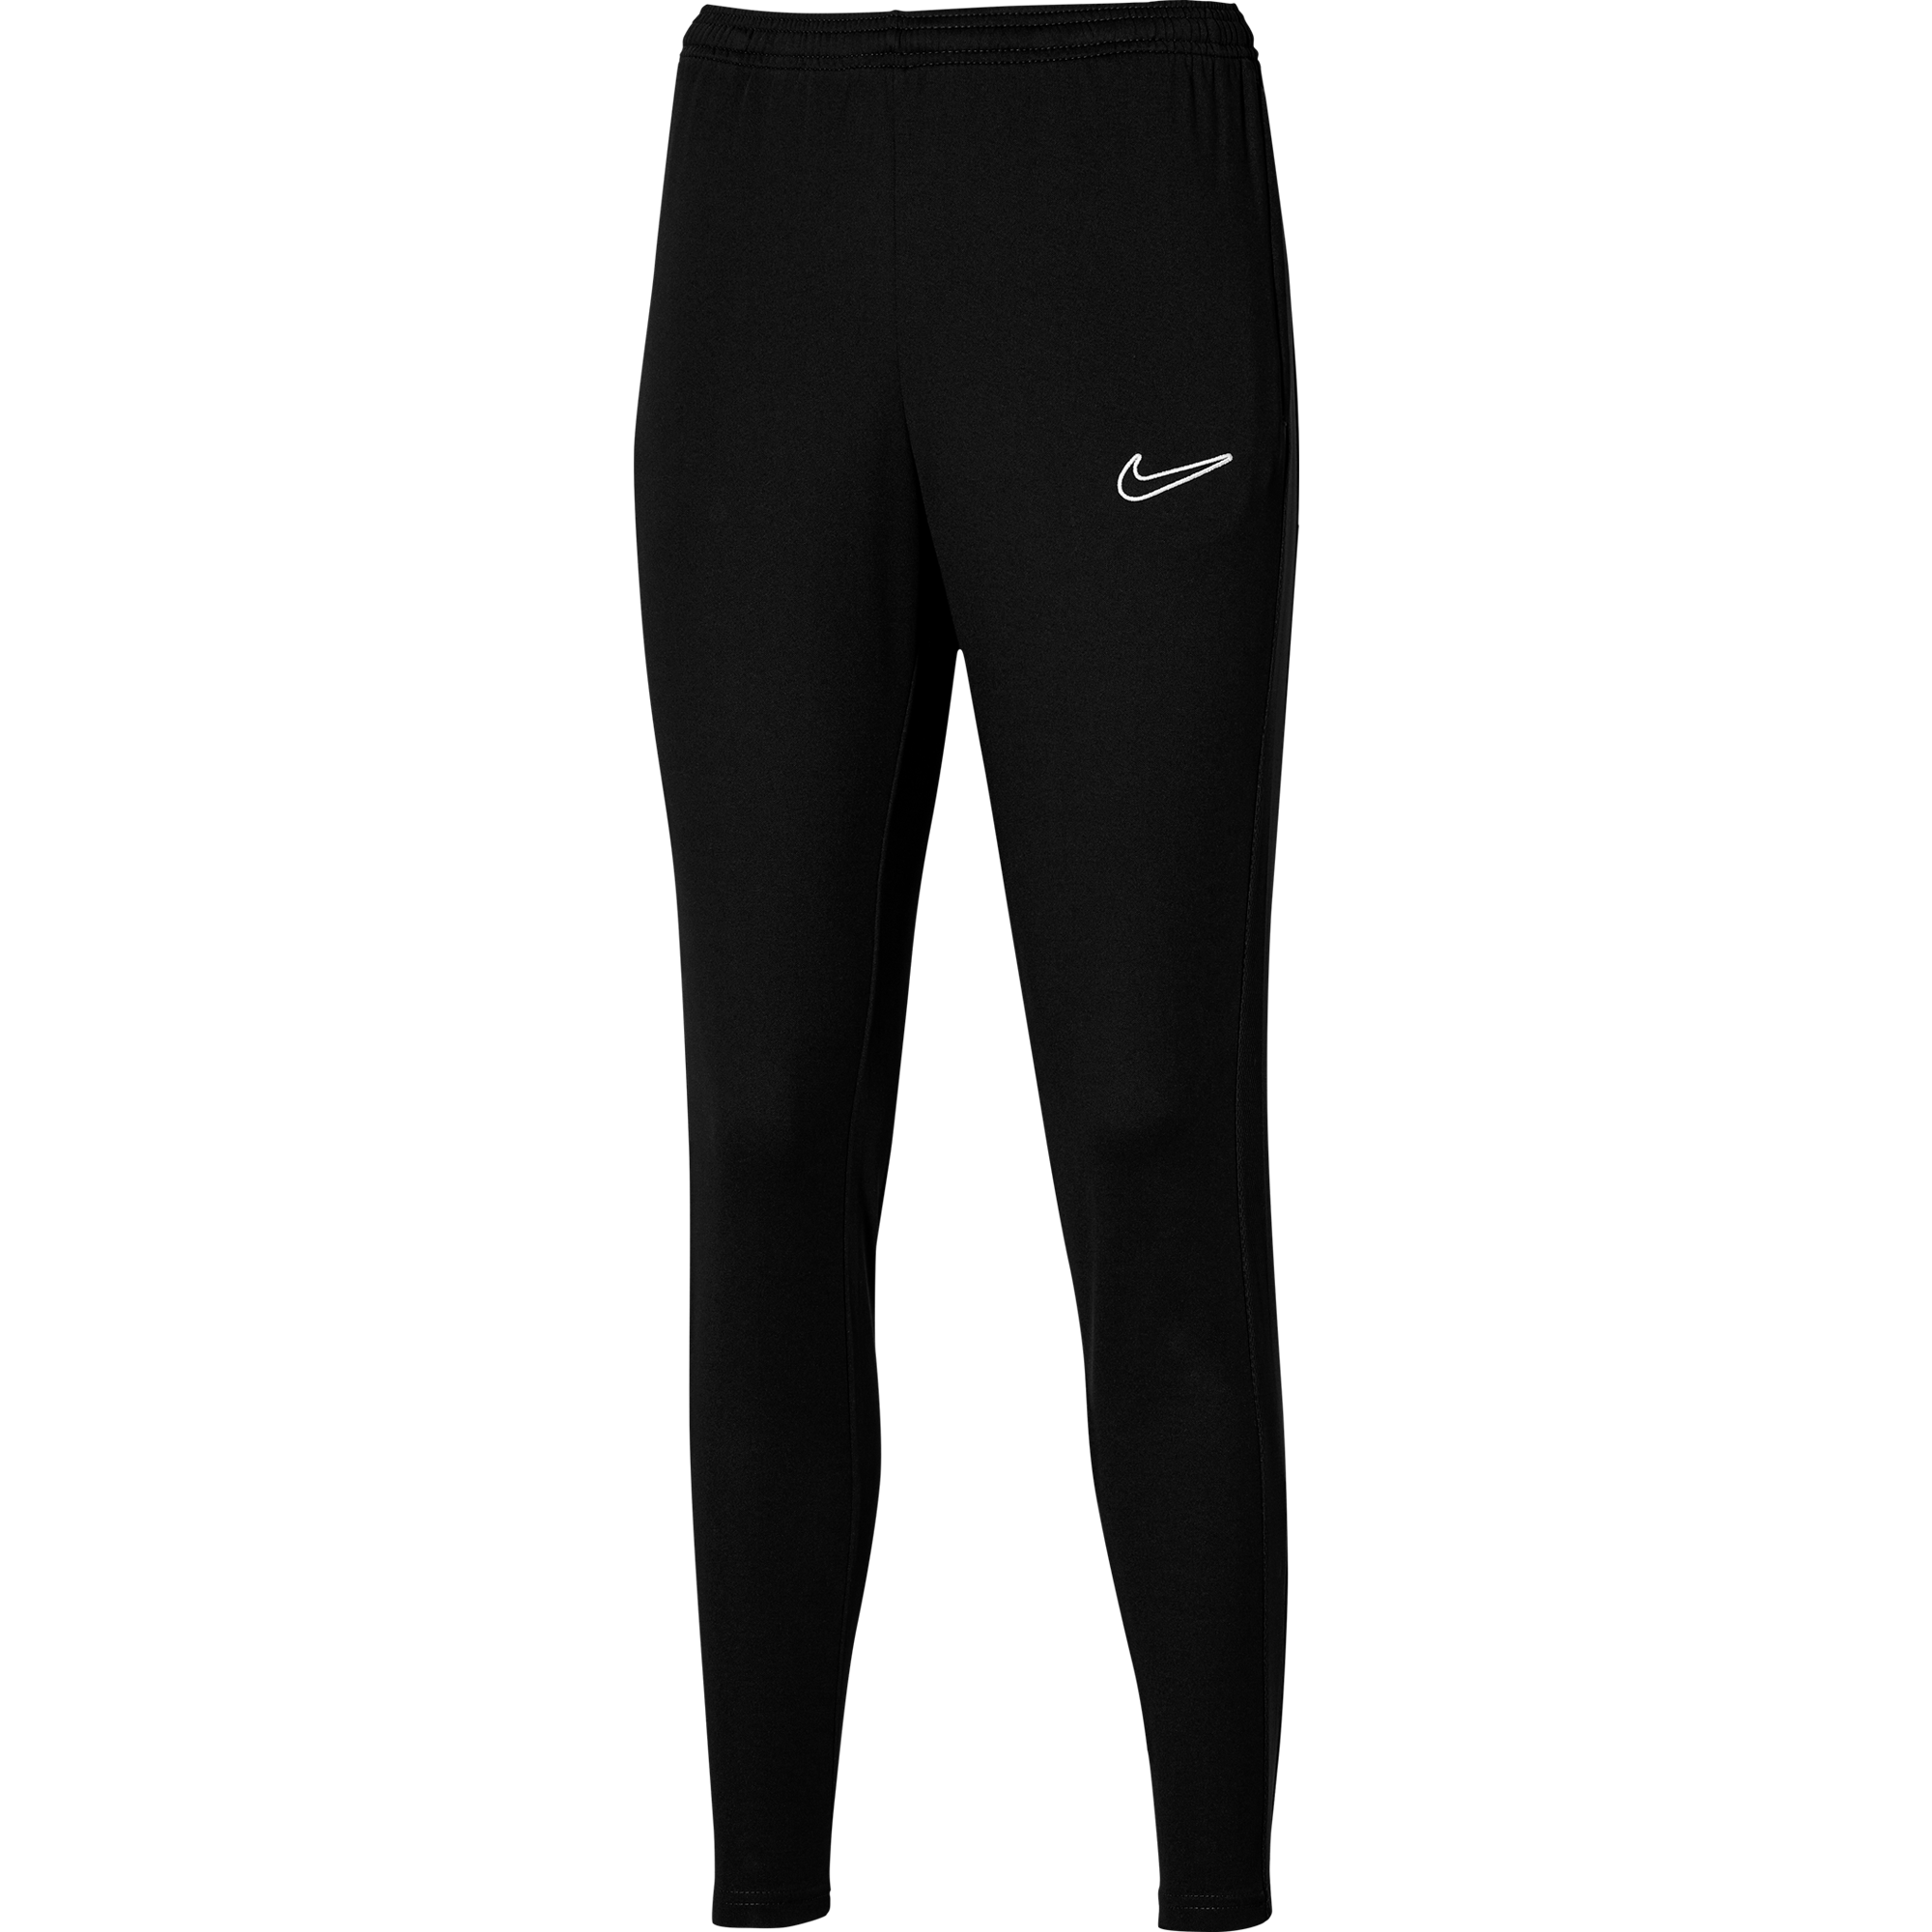 Clifton All Whites - Women's Academy 23 Knit Pant